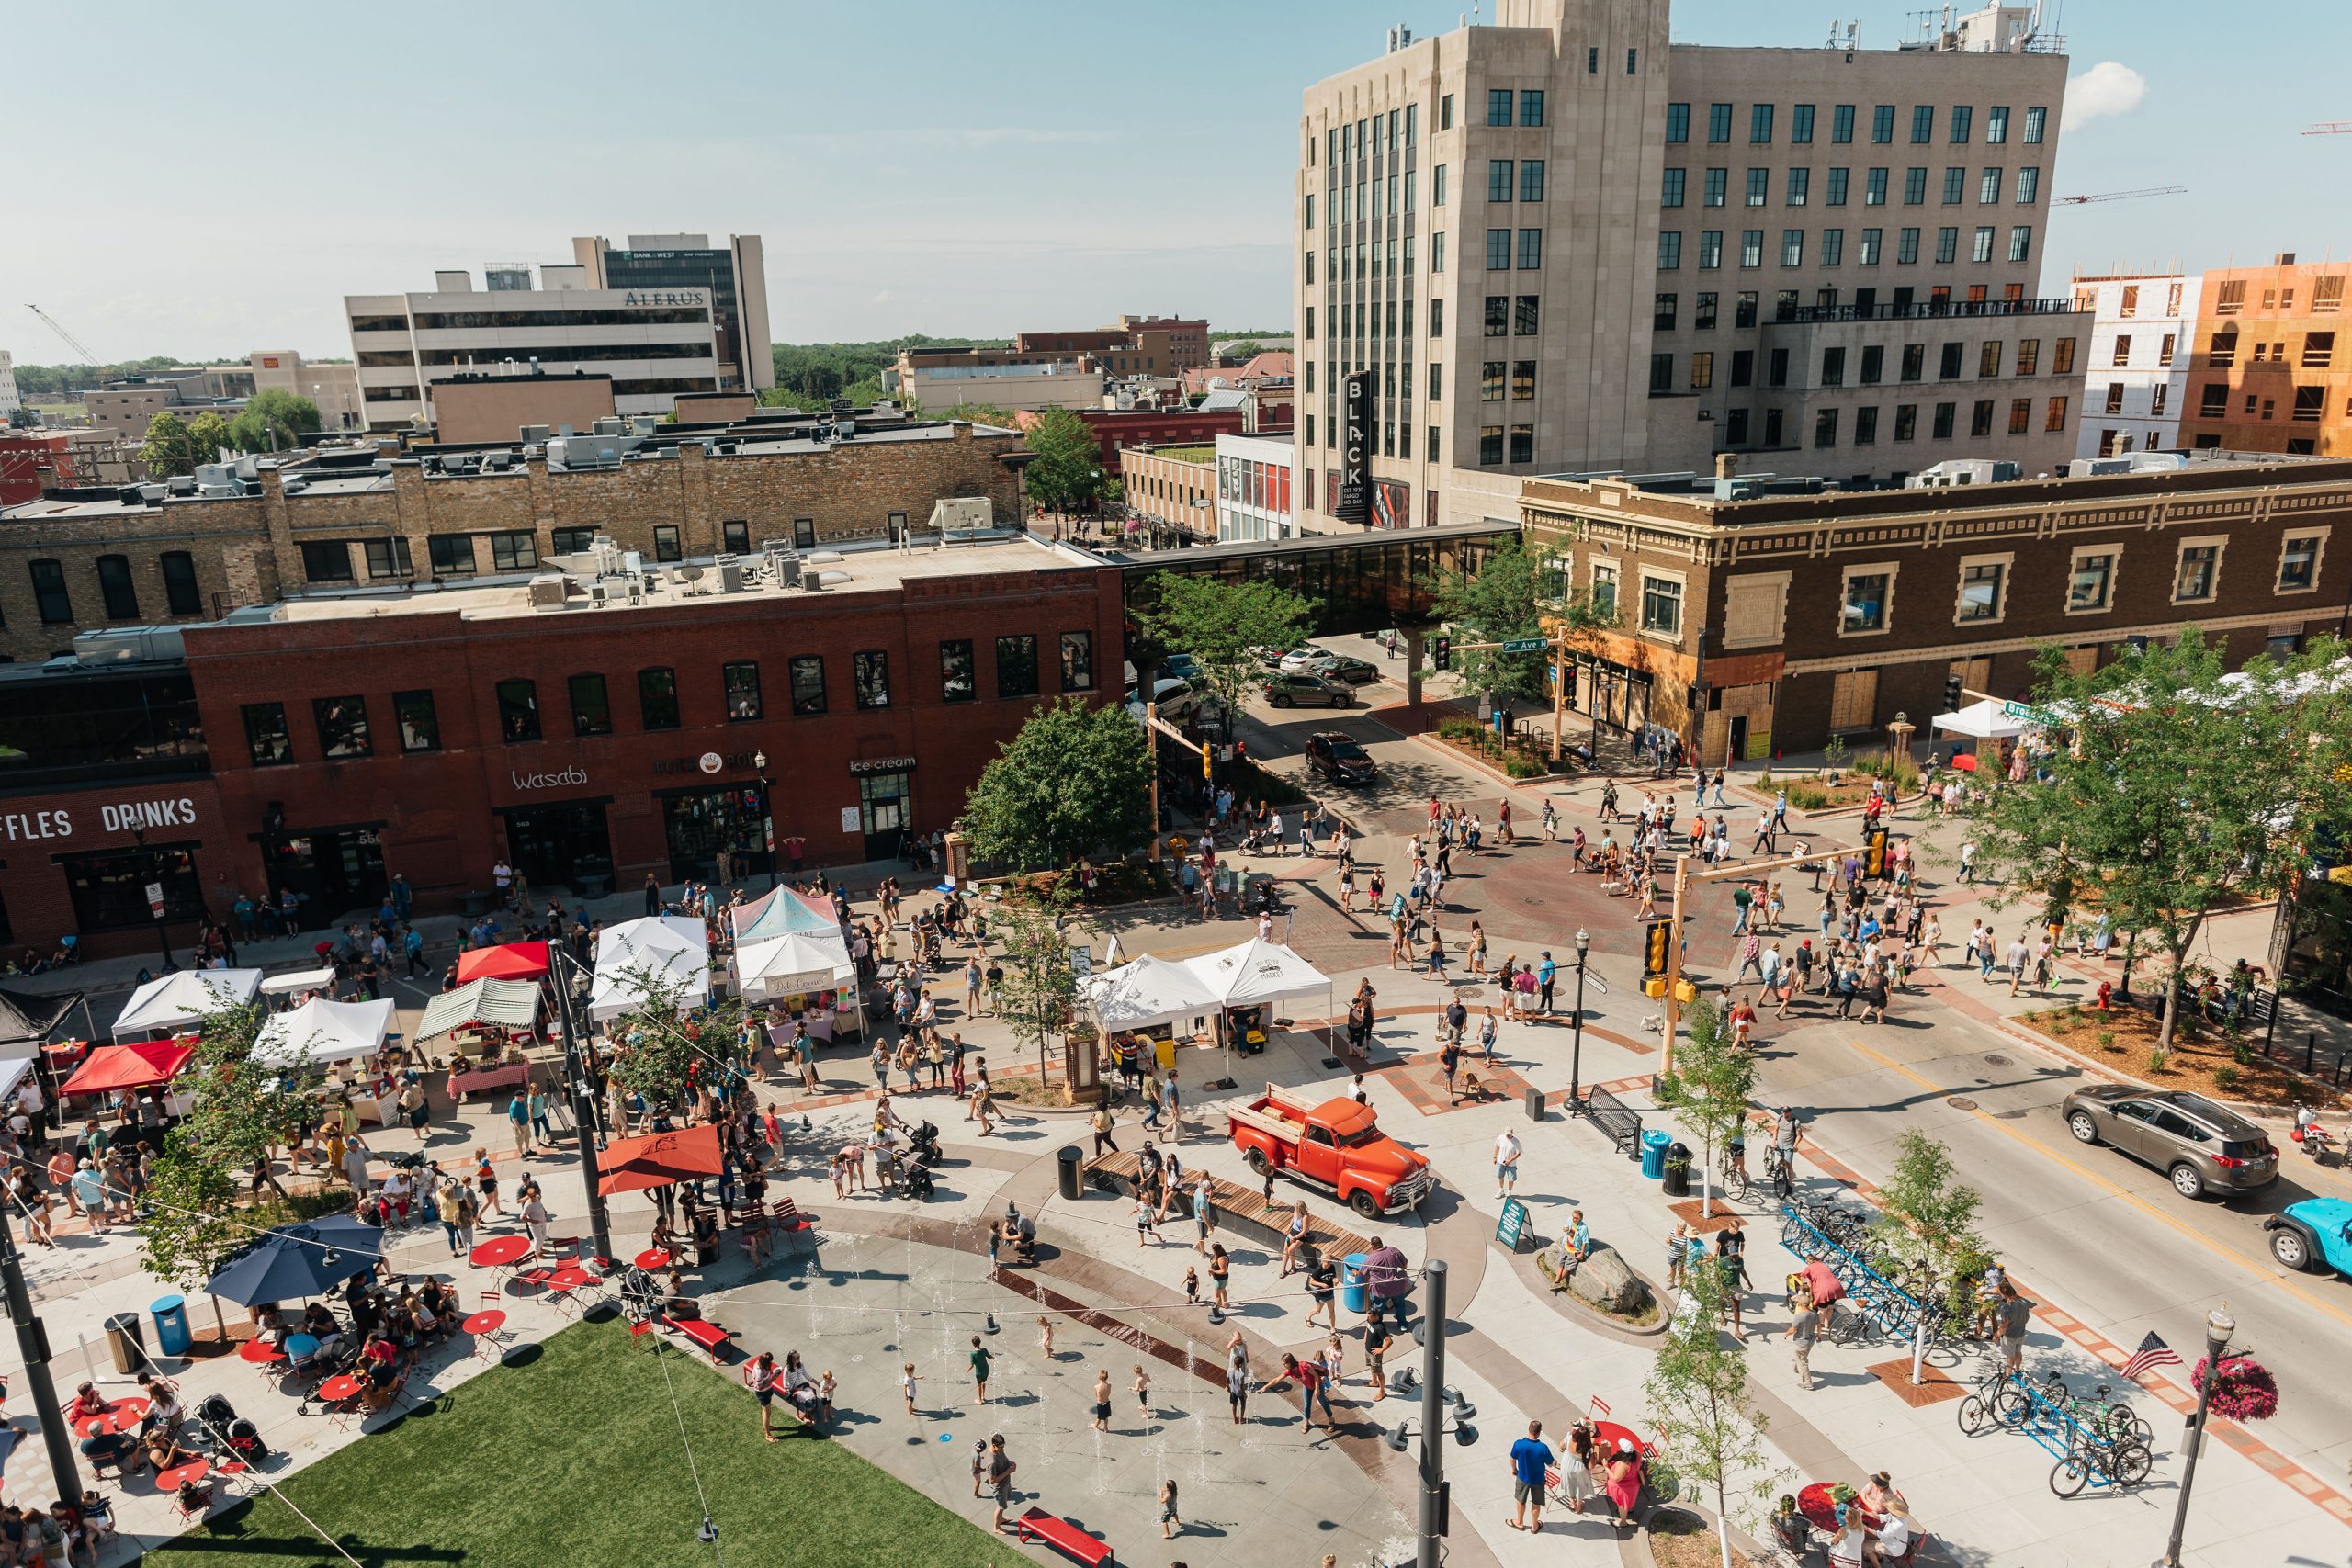 Downtown Fargo Named a Top-Three Midwestern Fall Destination